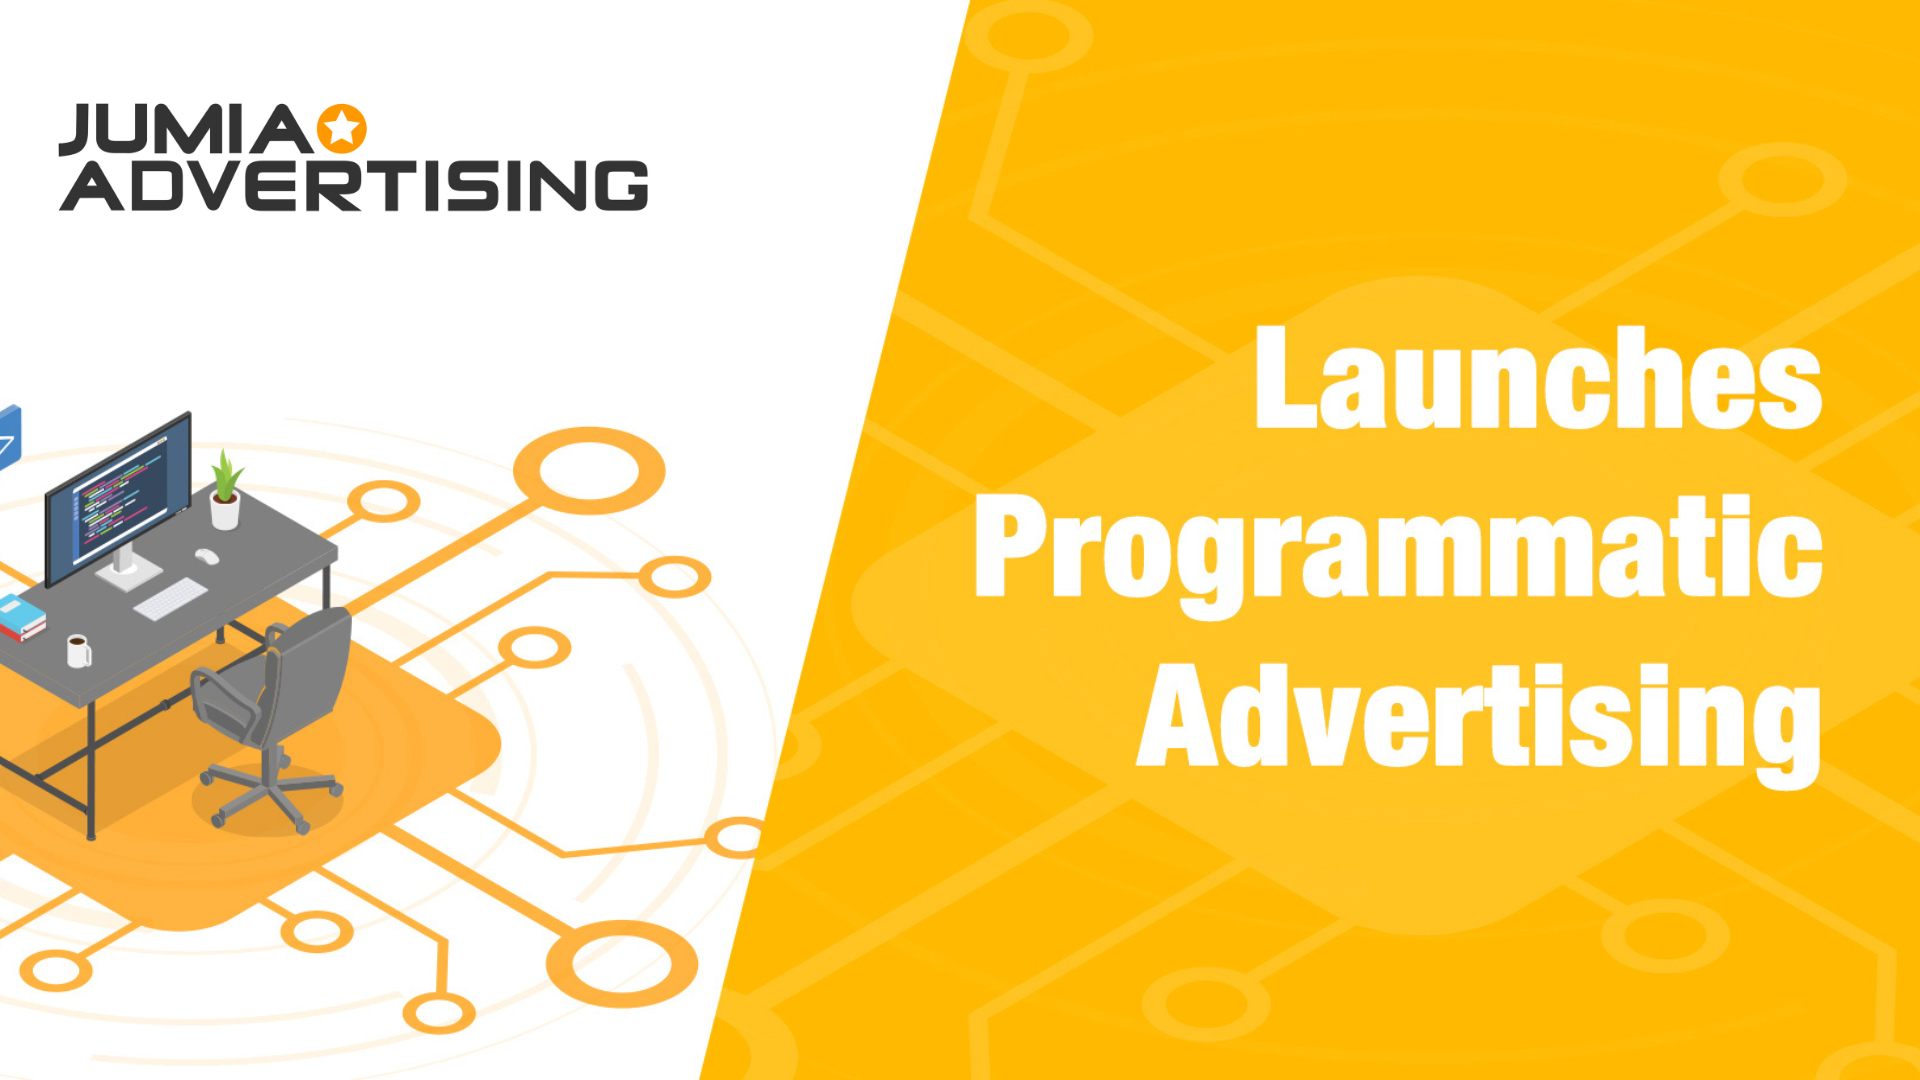 Jumia Advertising launches programmatic Ads, offering opportunities for brands to grow in Africa